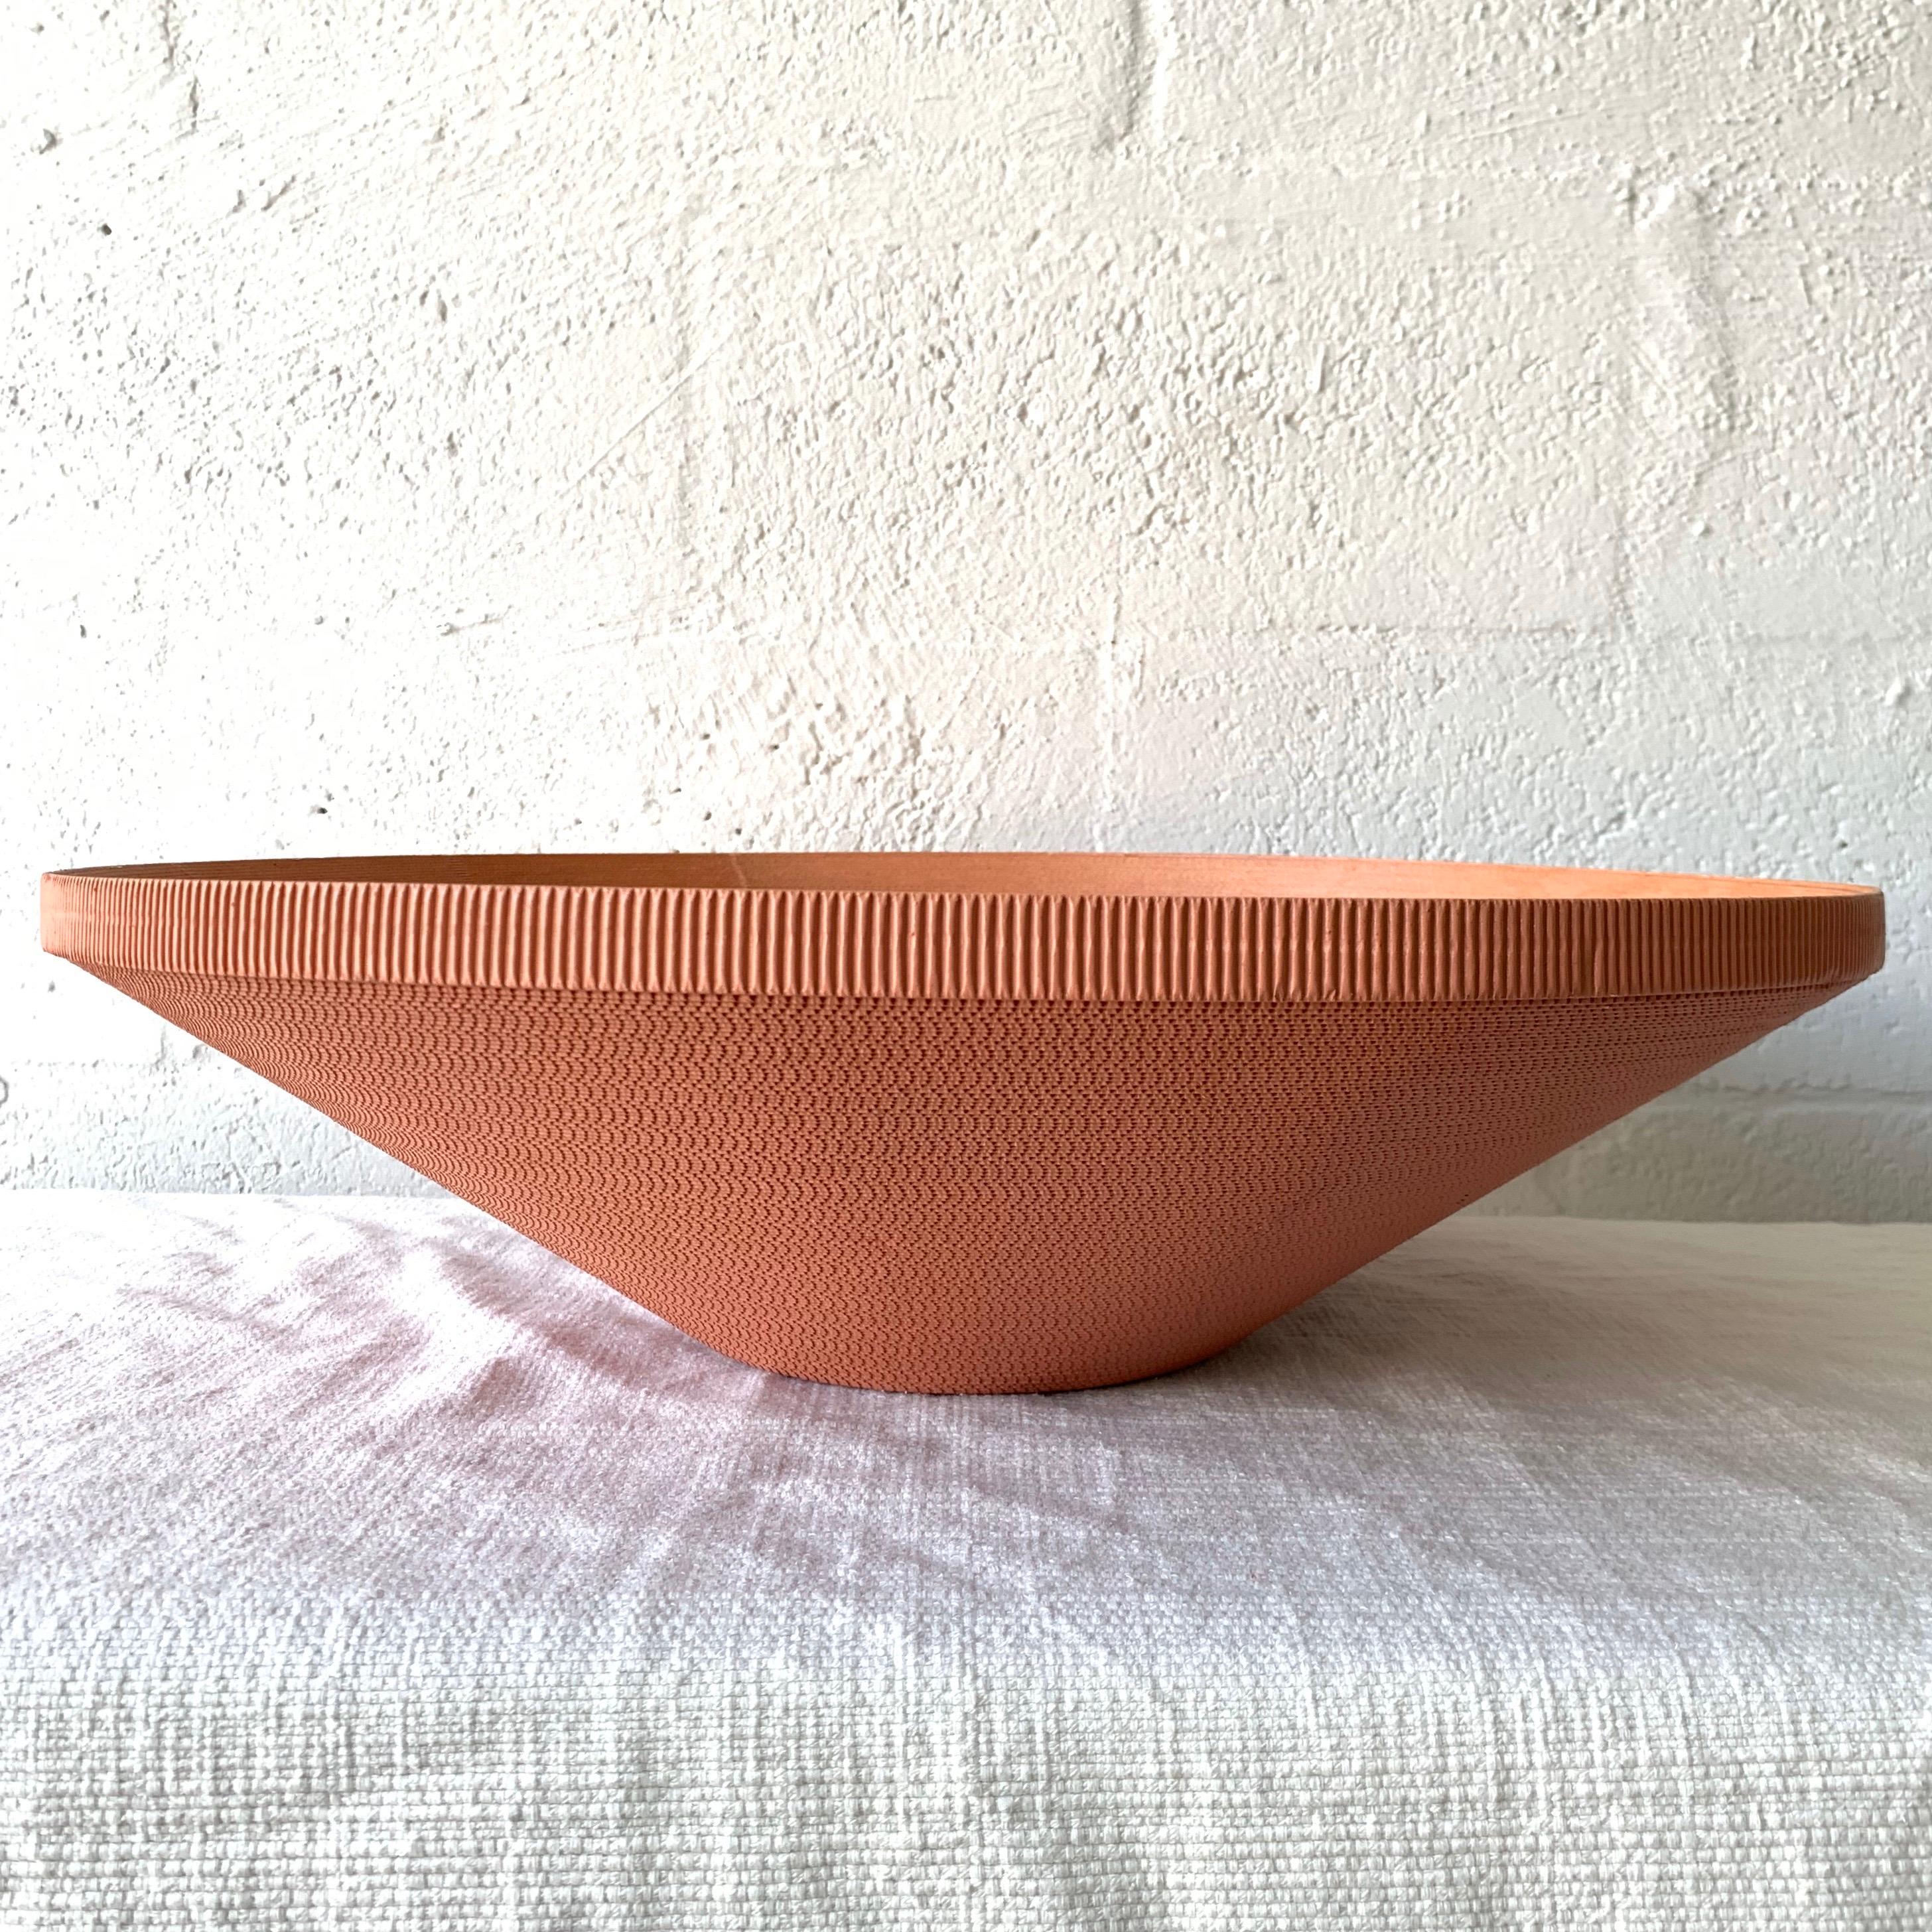 Postmodern bowl or vessel rendered in mauve pink painted corrugated cardboard, reminiscent of easy edges line by Frank Gehry.